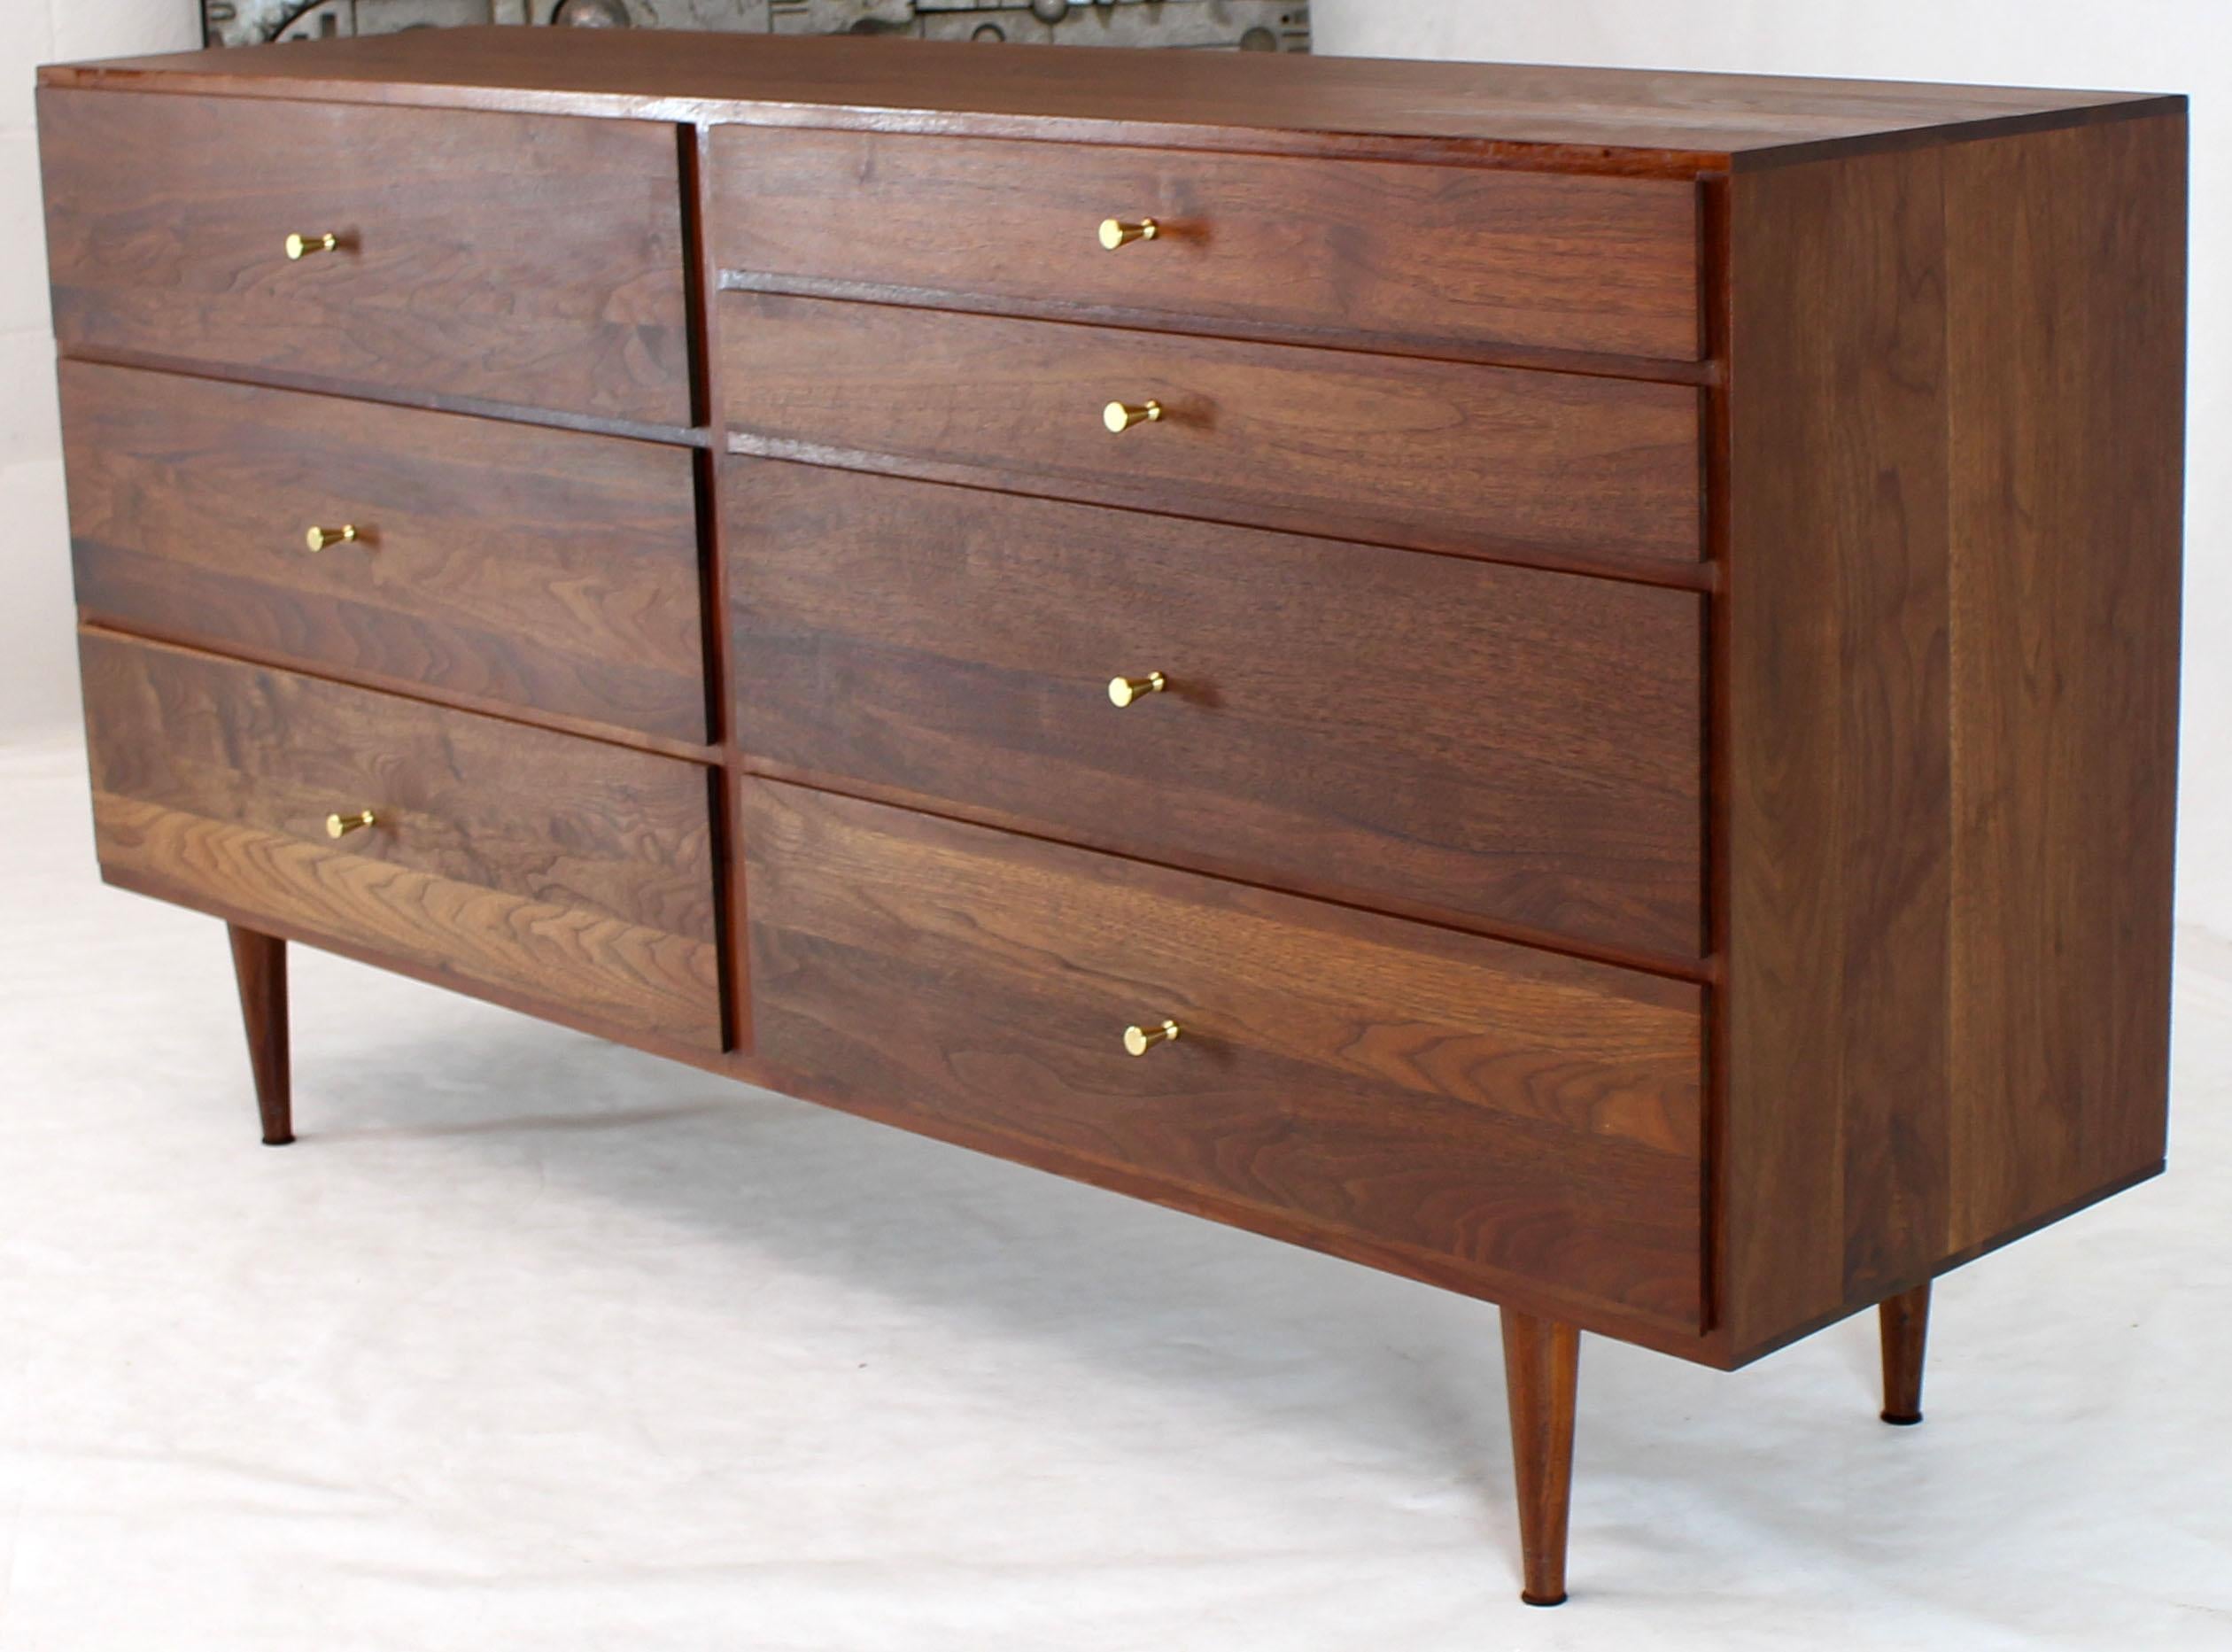 20th Century Solid Oiled Walnut Seven Drawers Double Dresser Brass Pulls Tapered Legs